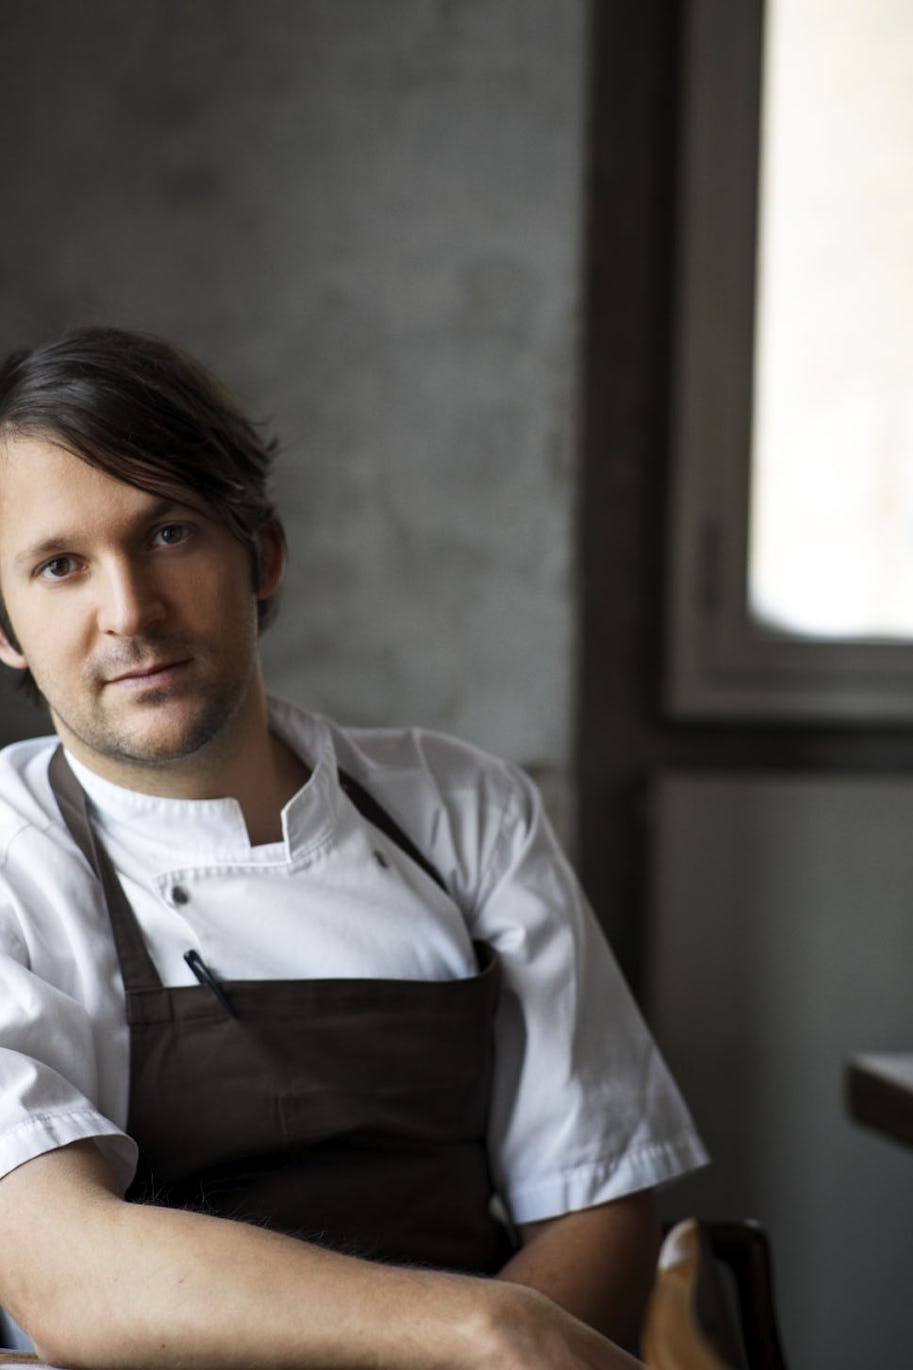 Noma returns to top spot at World’s 50 Best